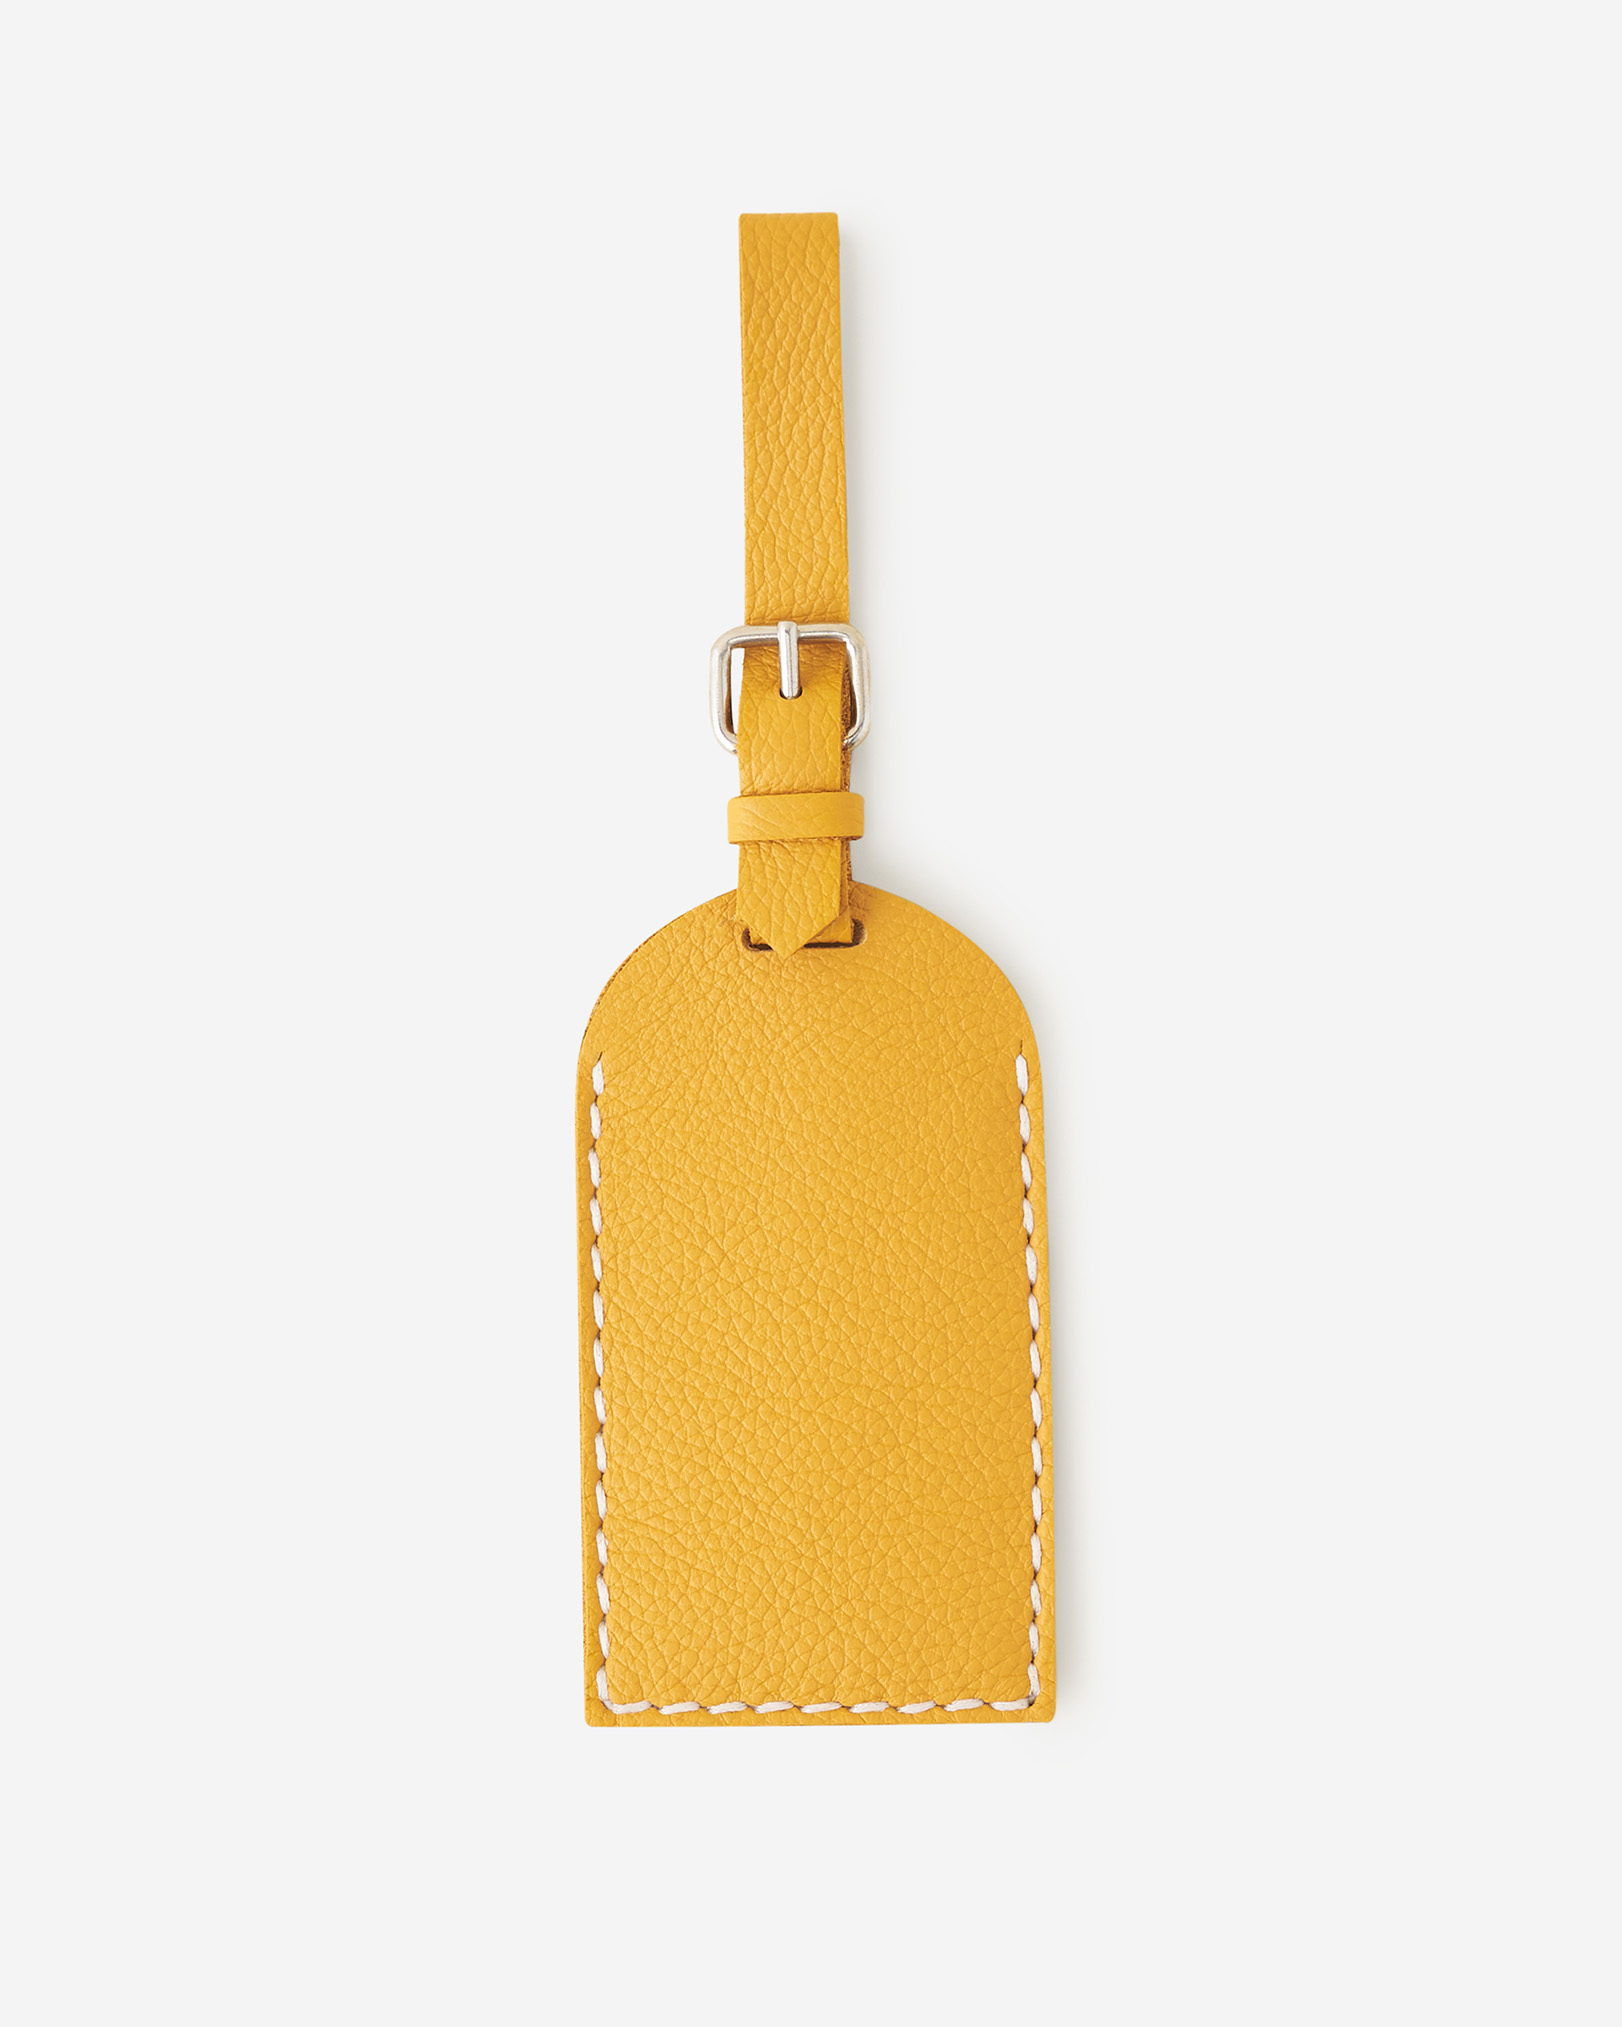 Roots Arch Luggage Tag Cervino in Old Gold